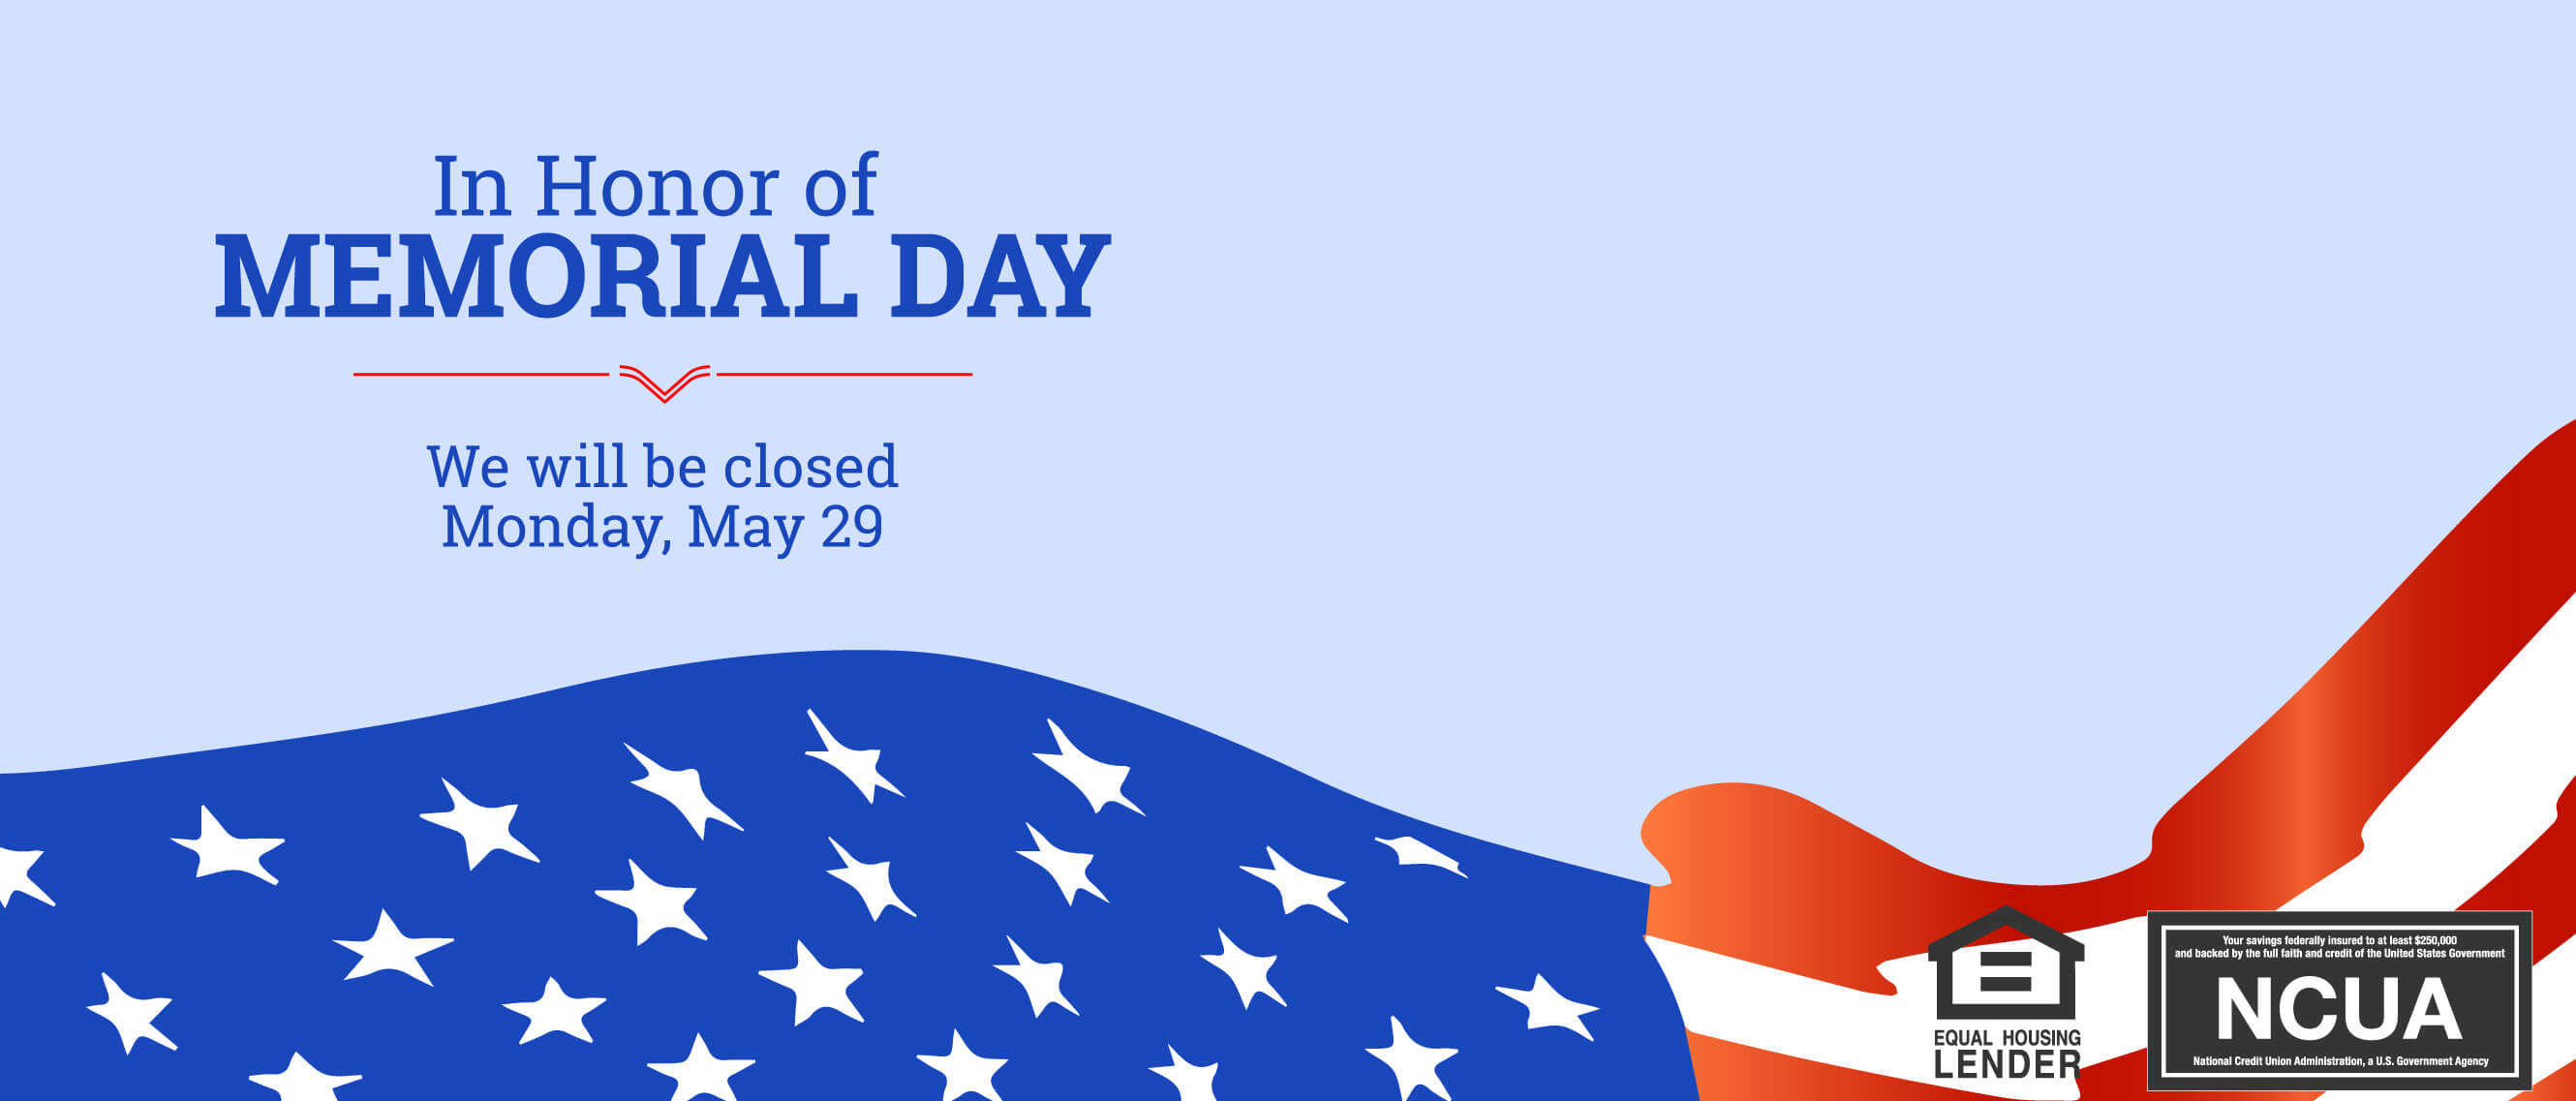 In Observance of Memorial Day We will be closed Monday, May. 29